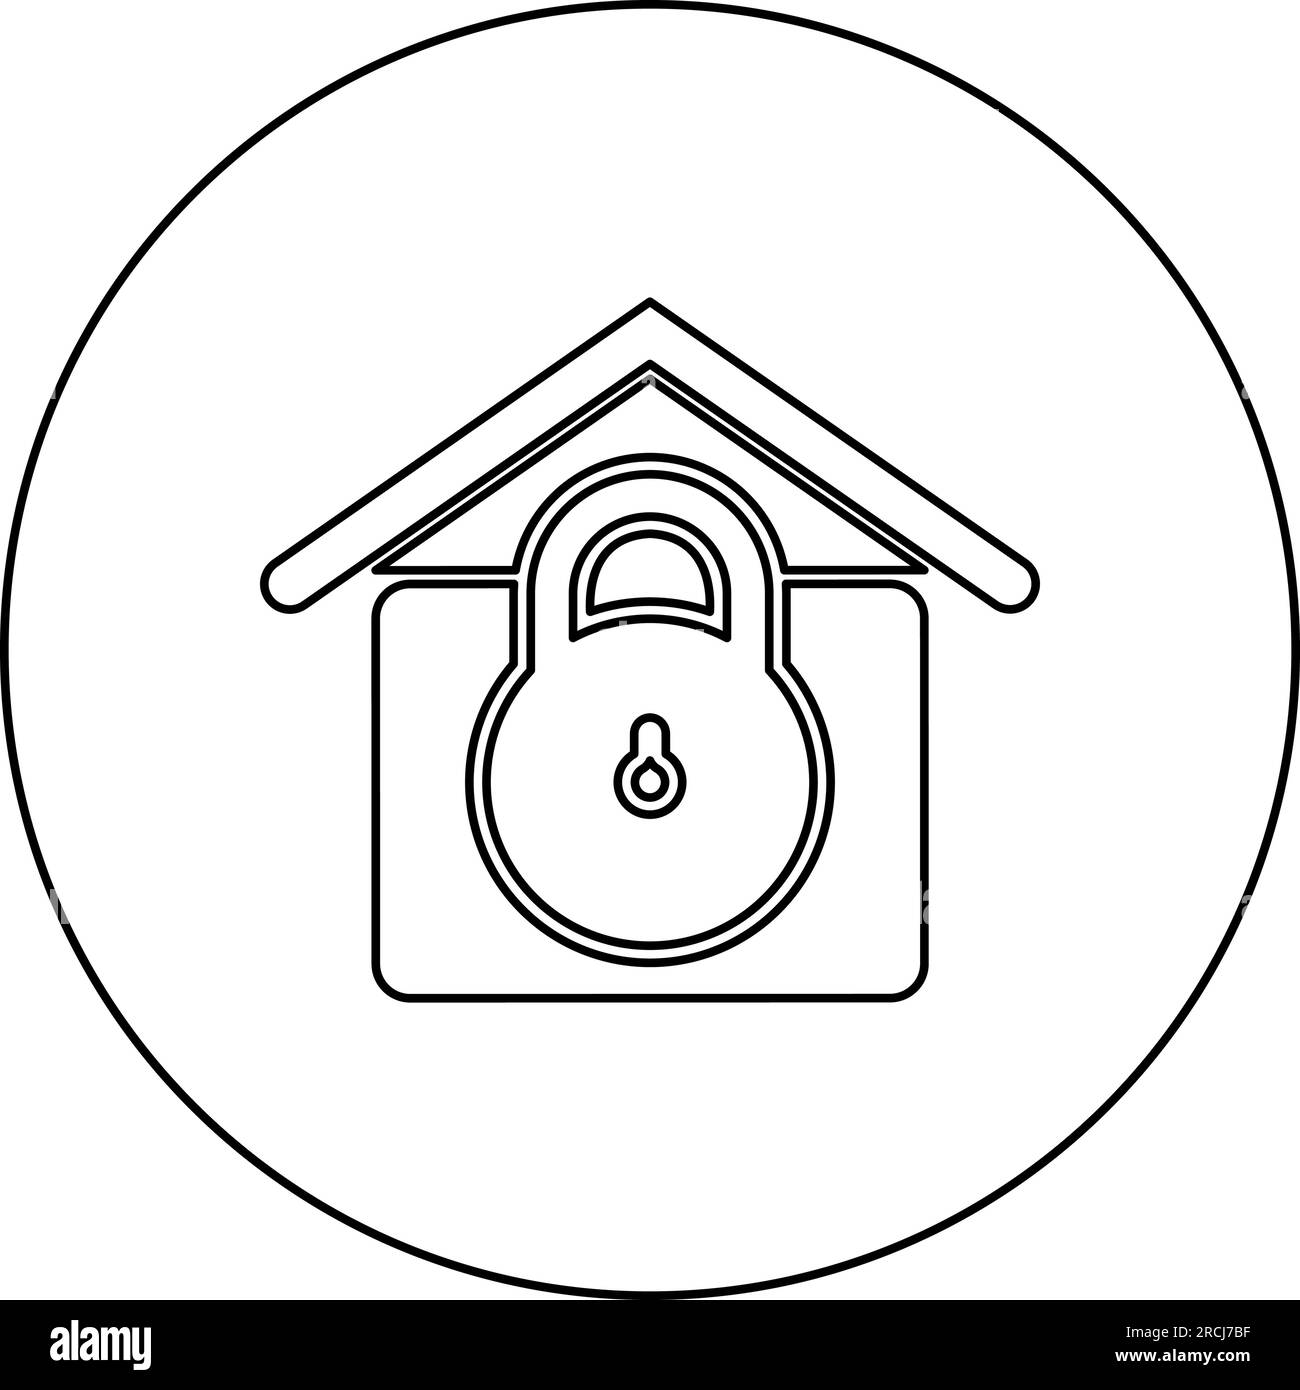 Lock house home protection with locked padlock concept safety defense security icon in circle round black color vector illustration image outline Stock Vector